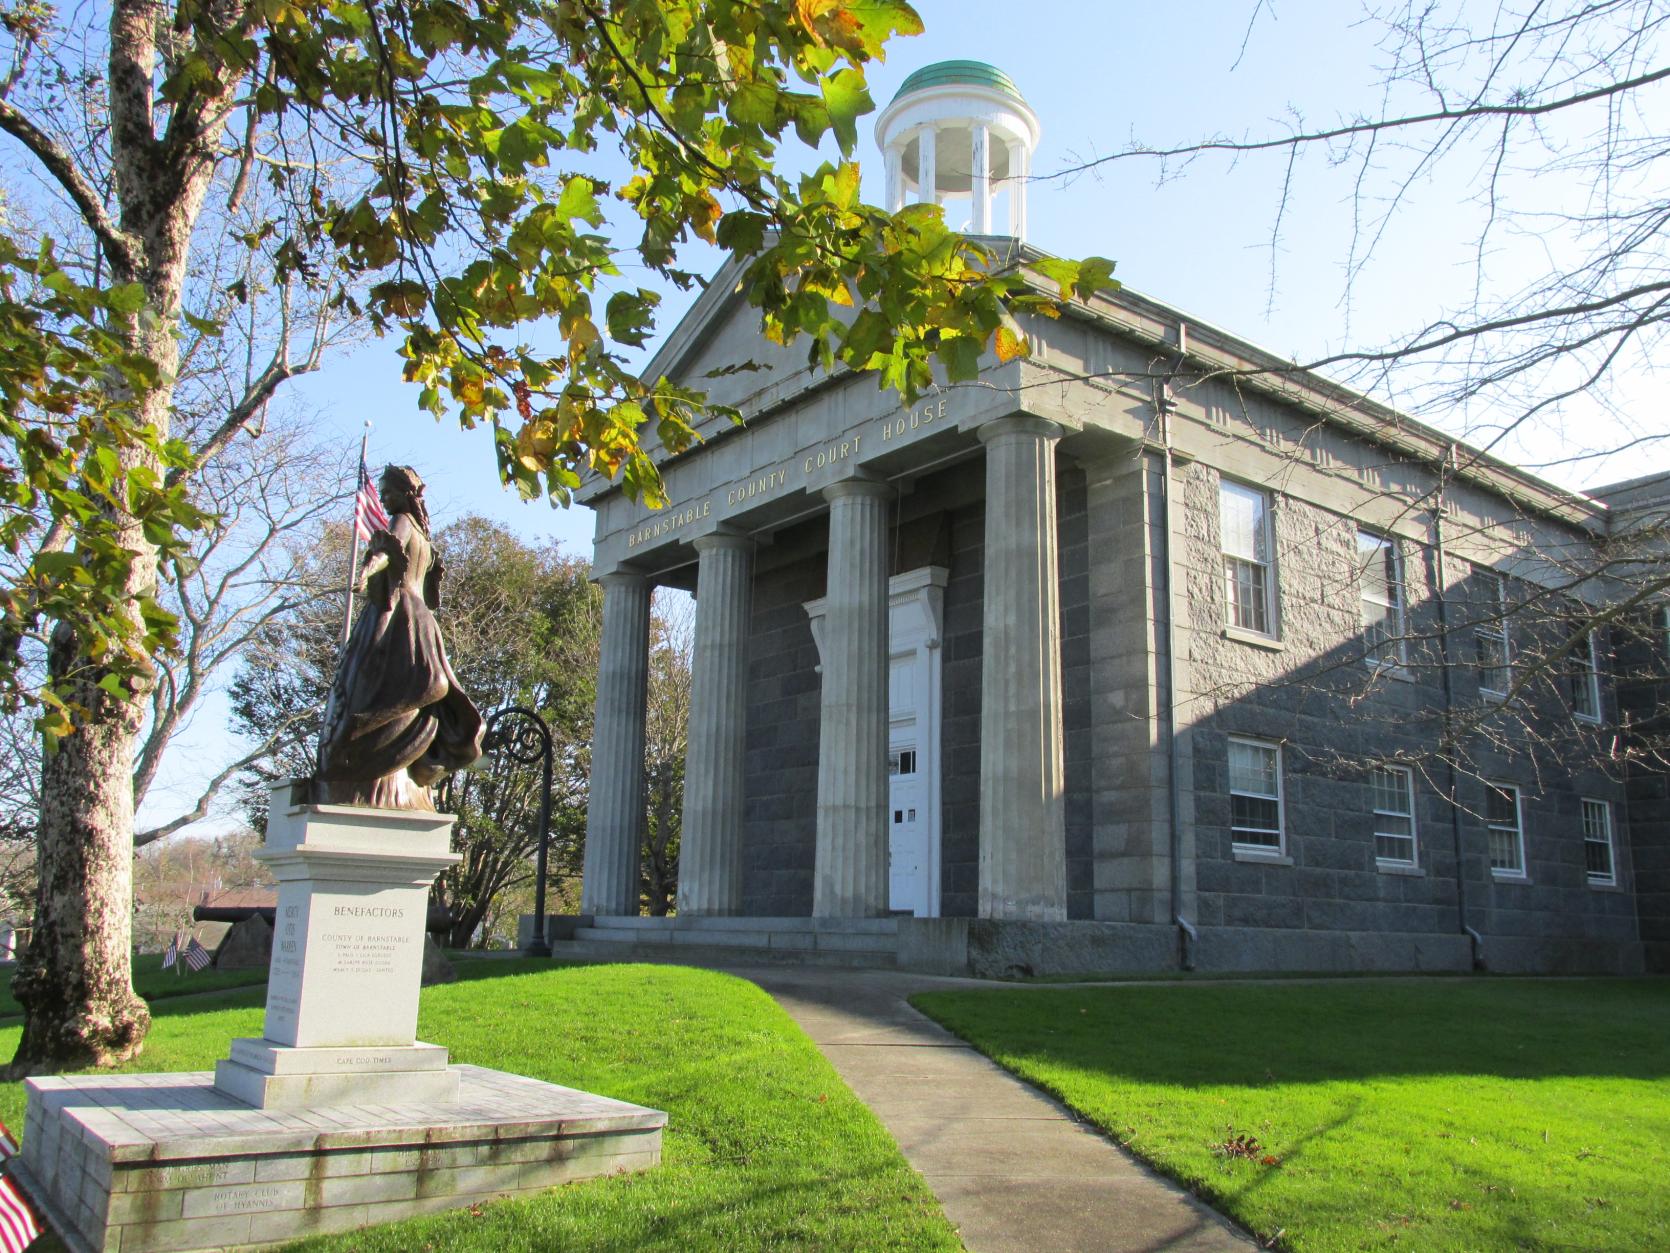 An image of the Barnstable County Court House